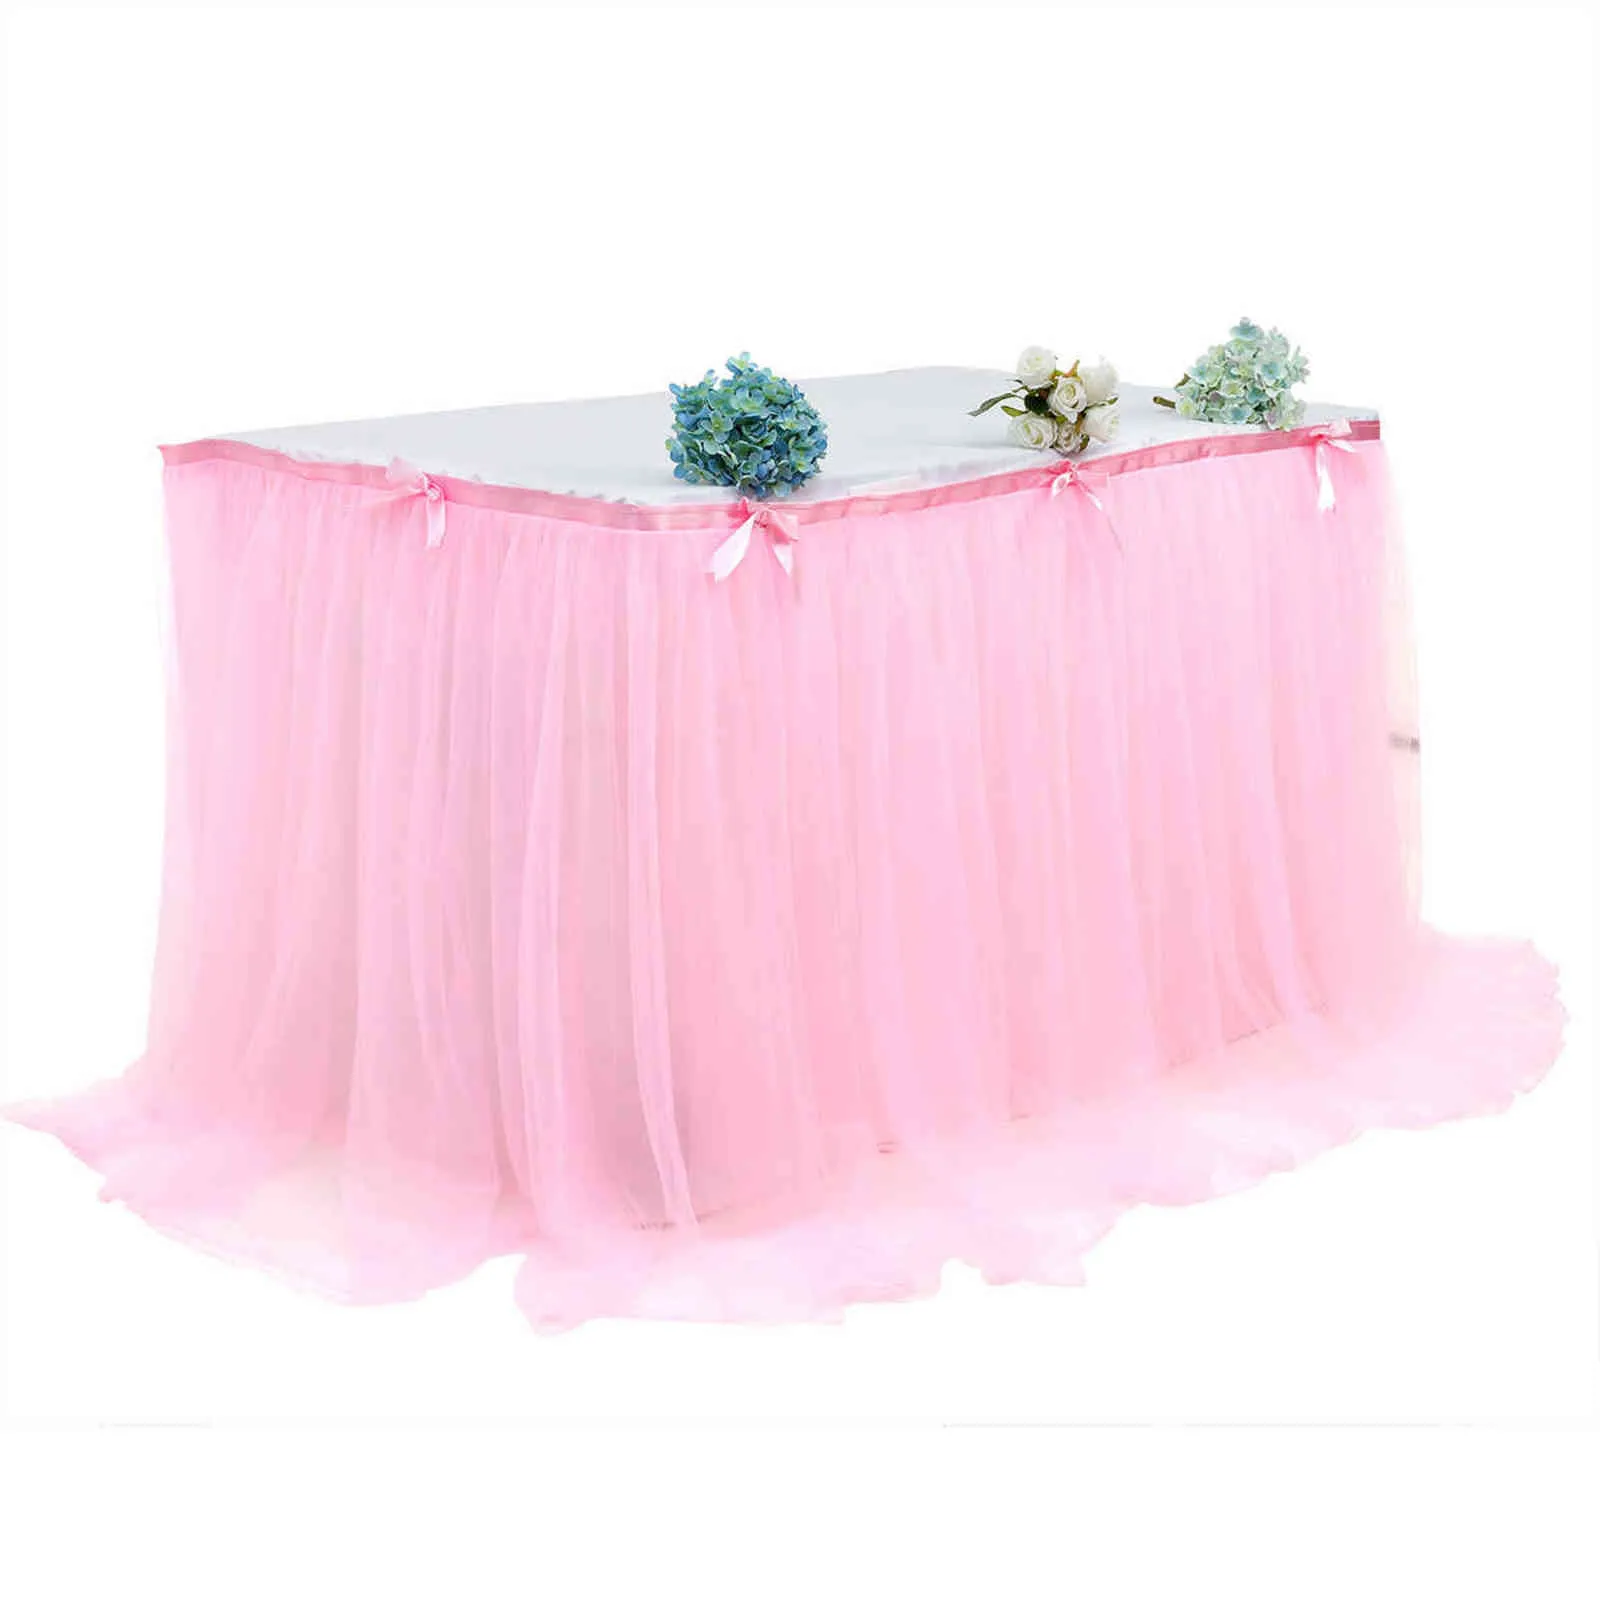 White Table Skirt Tutu Tulle Tableware Cloth Baby Shower Birthday Halloween Banquet Wedding Party Red Skirting Cover Home Decor 21235e